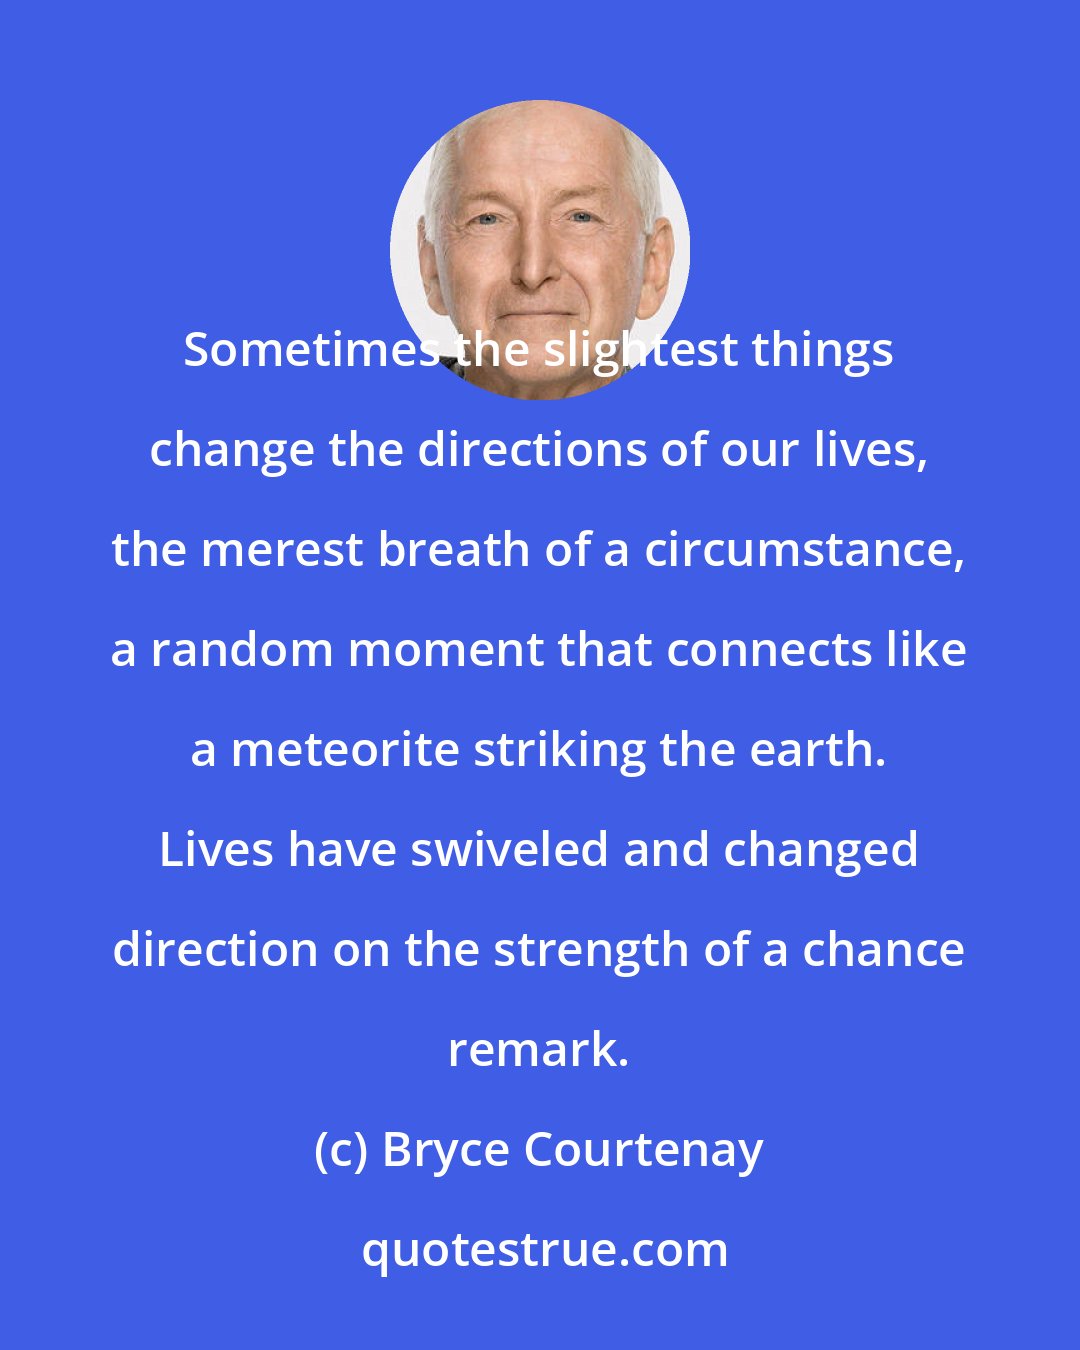 Bryce Courtenay: Sometimes the slightest things change the directions of our lives, the merest breath of a circumstance, a random moment that connects like a meteorite striking the earth. Lives have swiveled and changed direction on the strength of a chance remark.